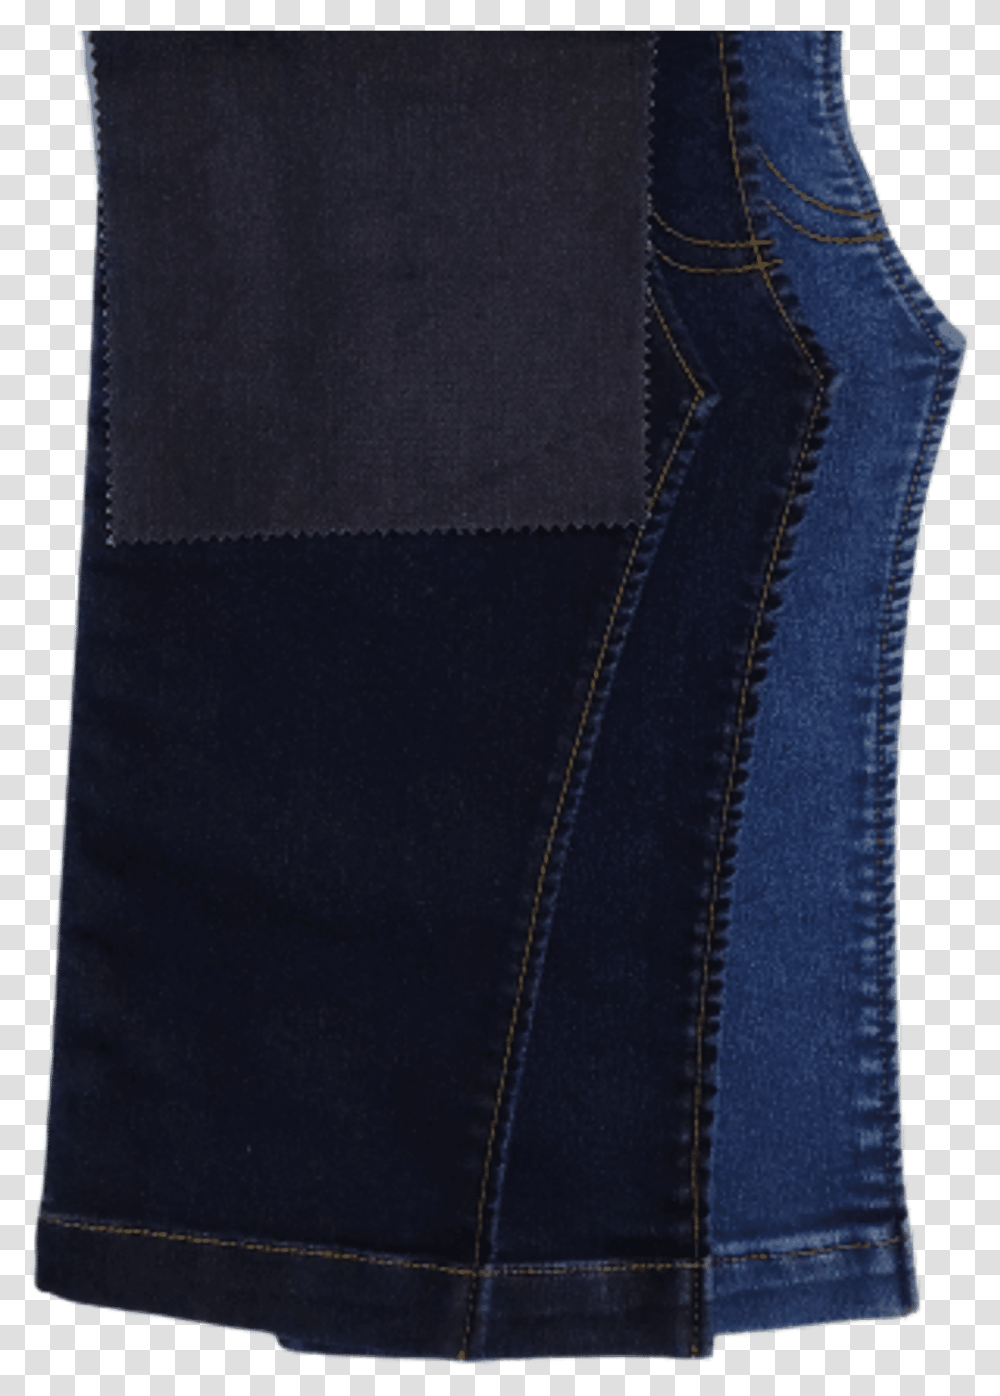 Dobby Knitted Denim Fabric With Stretch Denim, Apparel, Pants, Jeans Transparent Png